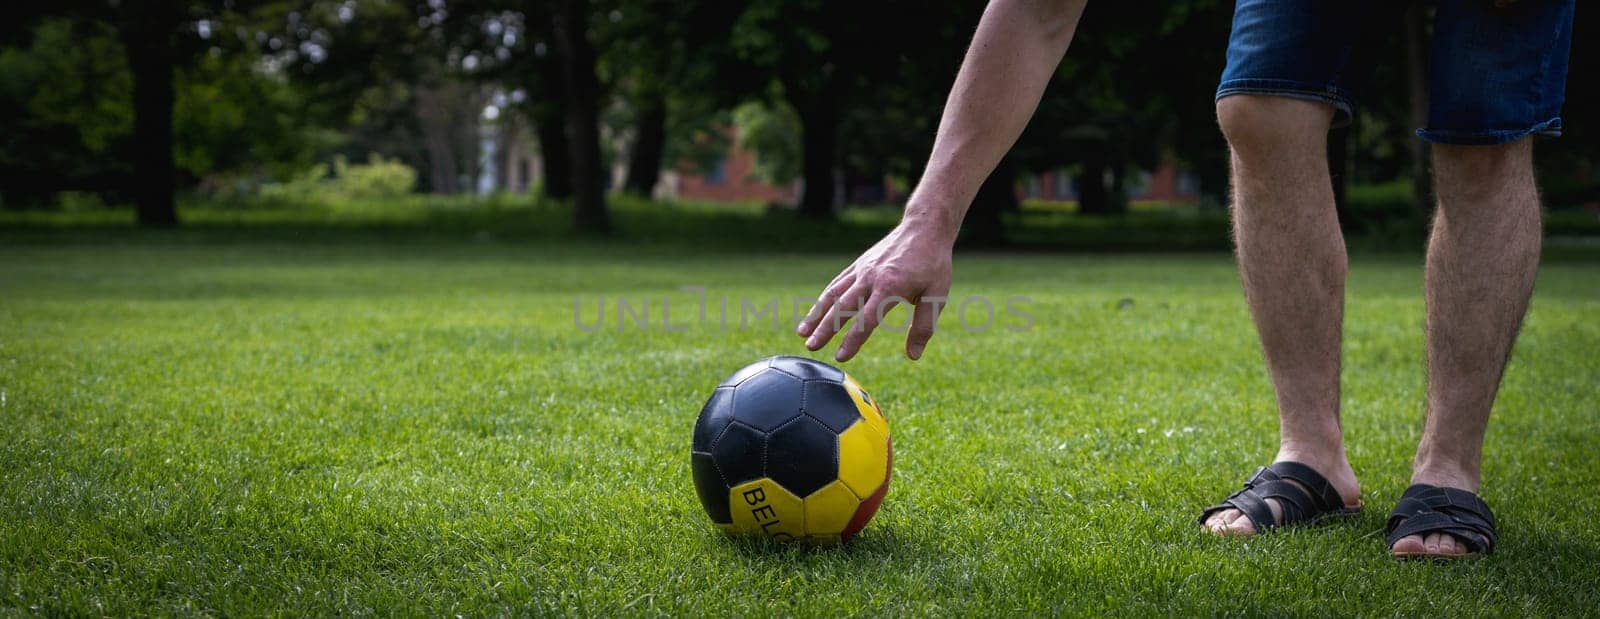 A man reaches for a soccer ball on the green lawn. by Nataliya